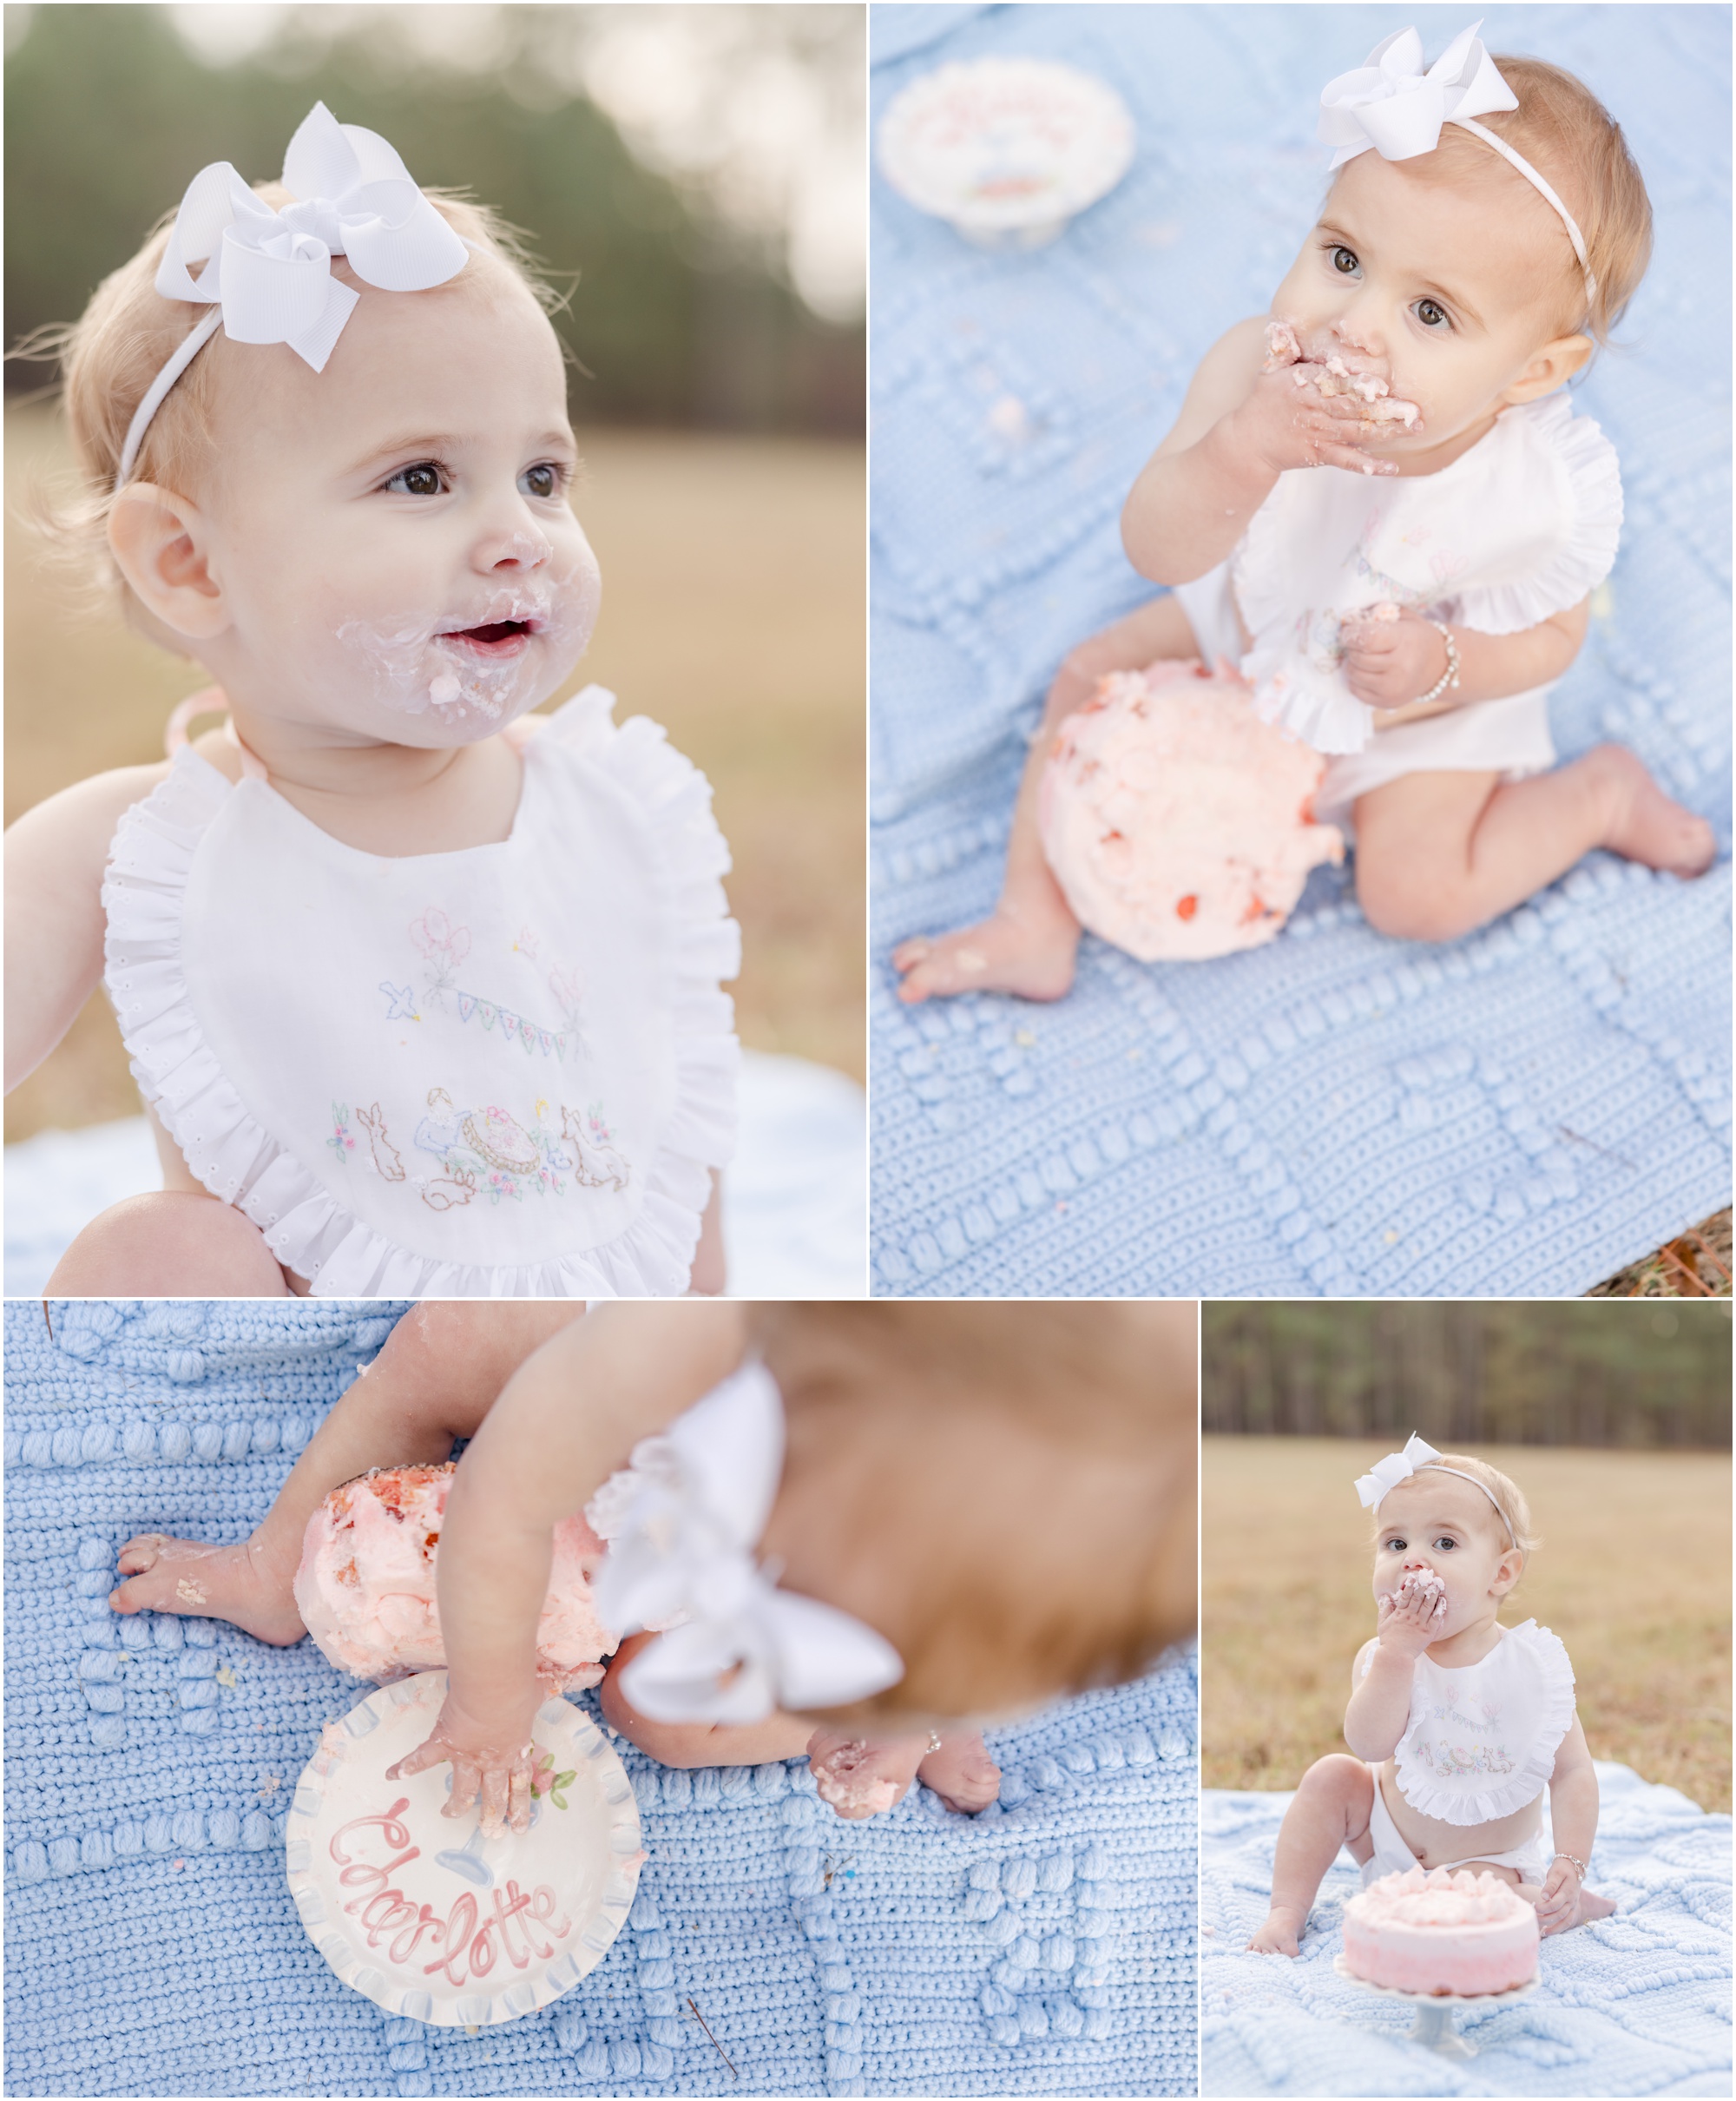 A one year old girl in an embroidered bib and bloomers enjoys cake during a Greenville first birthday cake smash  photo session.